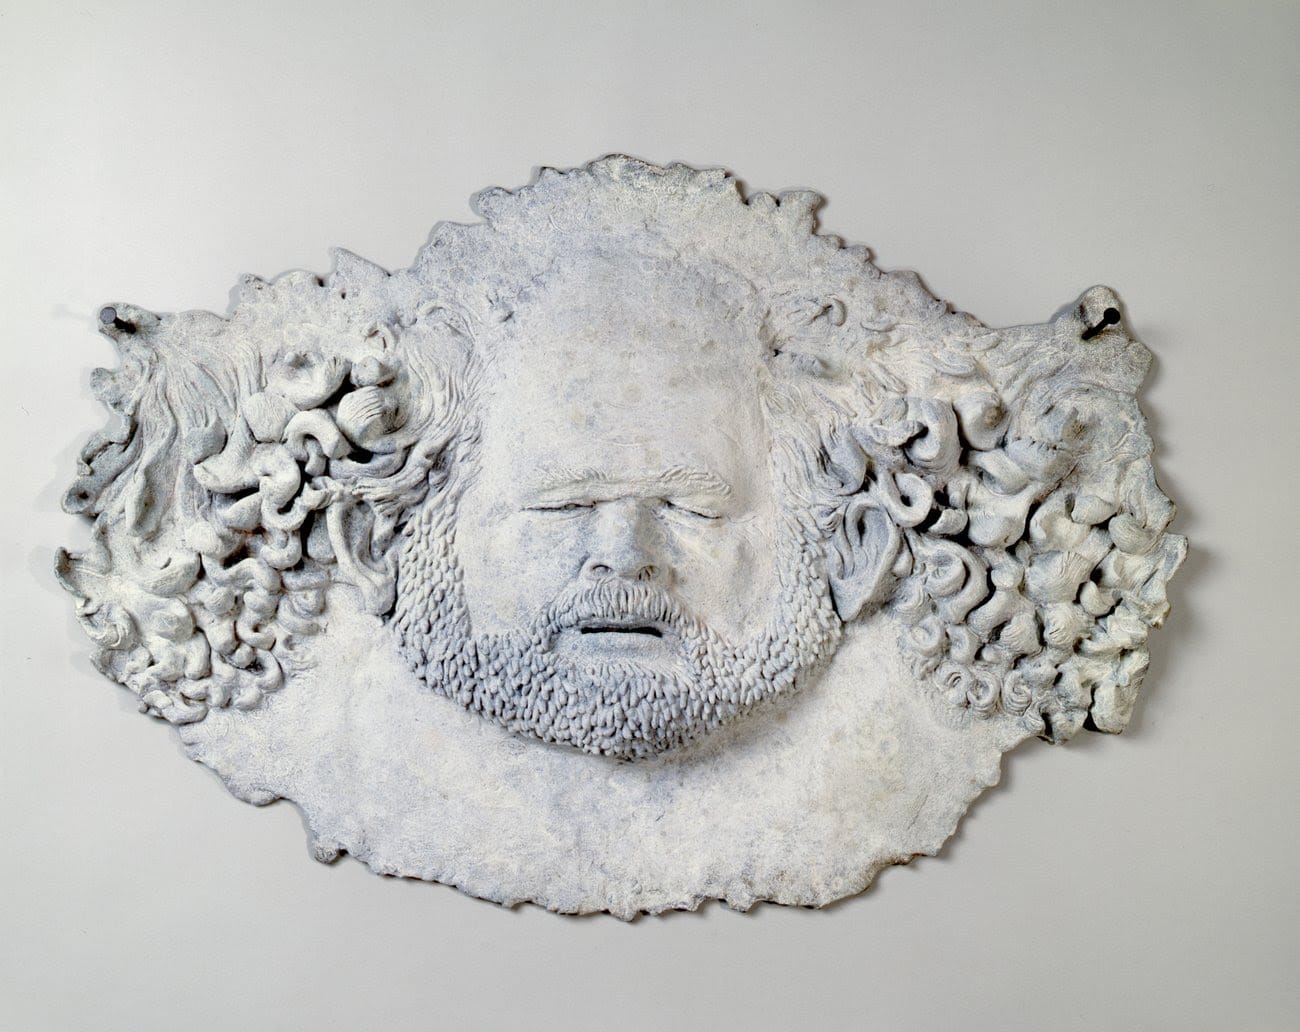 Robert Arneson, Head Skinned & Bleached, 1986. Bronze, 21 1/2 x 31 1/2 x 2 3/4 inches. Edition of 3, 1 AP.
© Estate of Robert Arneson, licensed by VAGA at ARS (Artists Rights Society), New York.